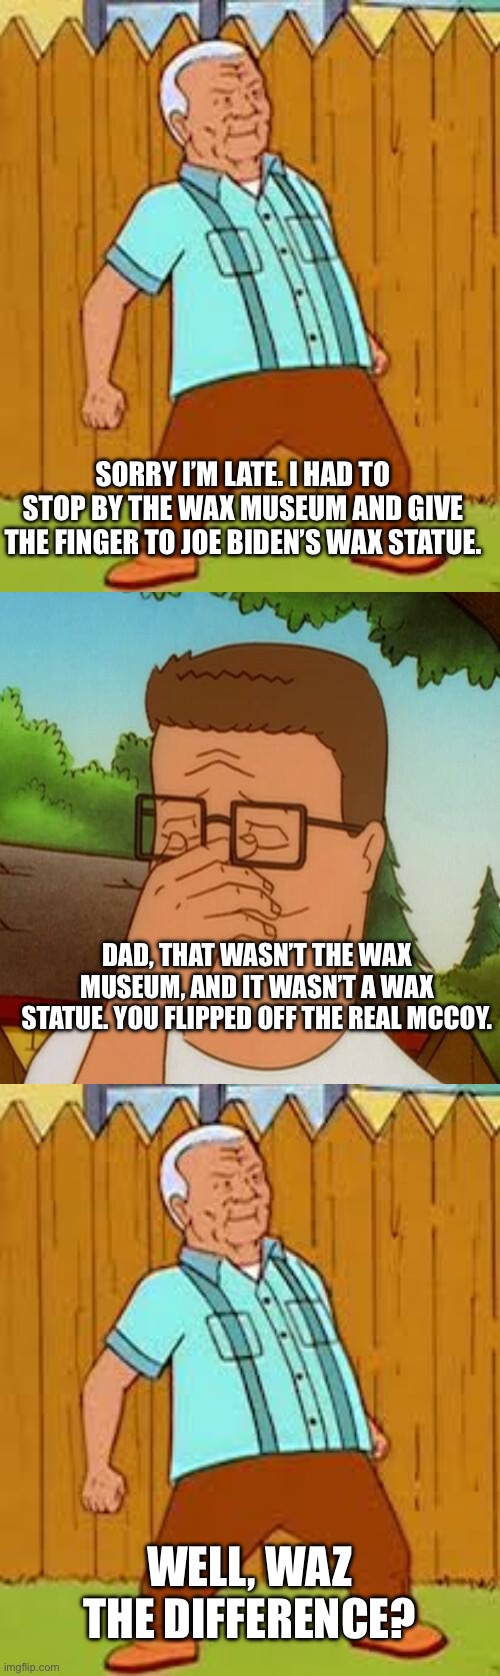 SORRY I’M LATE. I HAD TO STOP BY THE WAX MUSEUM AND GIVE THE FINGER TO JOE BIDEN’S WAX STATUE. DAD, THAT WASN’T THE WAX MUSEUM, AND IT WASN’T A WAX STATUE. YOU FLIPPED OFF THE REAL MCCOY. WELL, WAZ THE DIFFERENCE? | image tagged in cotton hill thrust,hank hill | made w/ Imgflip meme maker